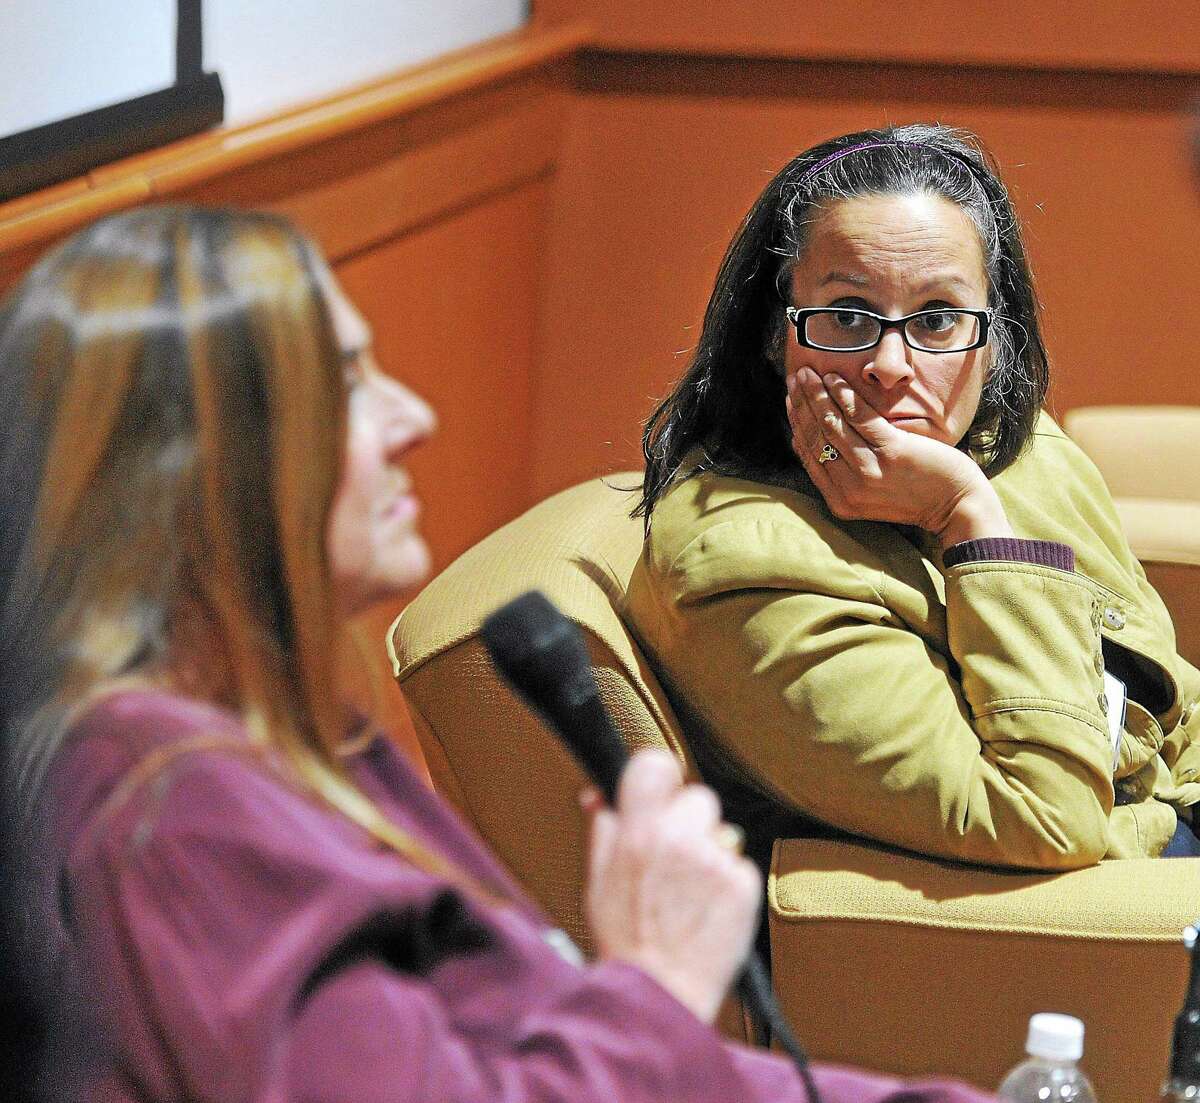 Kathy Flaherty, executive director of the Middletown-based Connecticut Legal Defense Project, takes part in a symposium at Quinnipiac University in this archive picture.